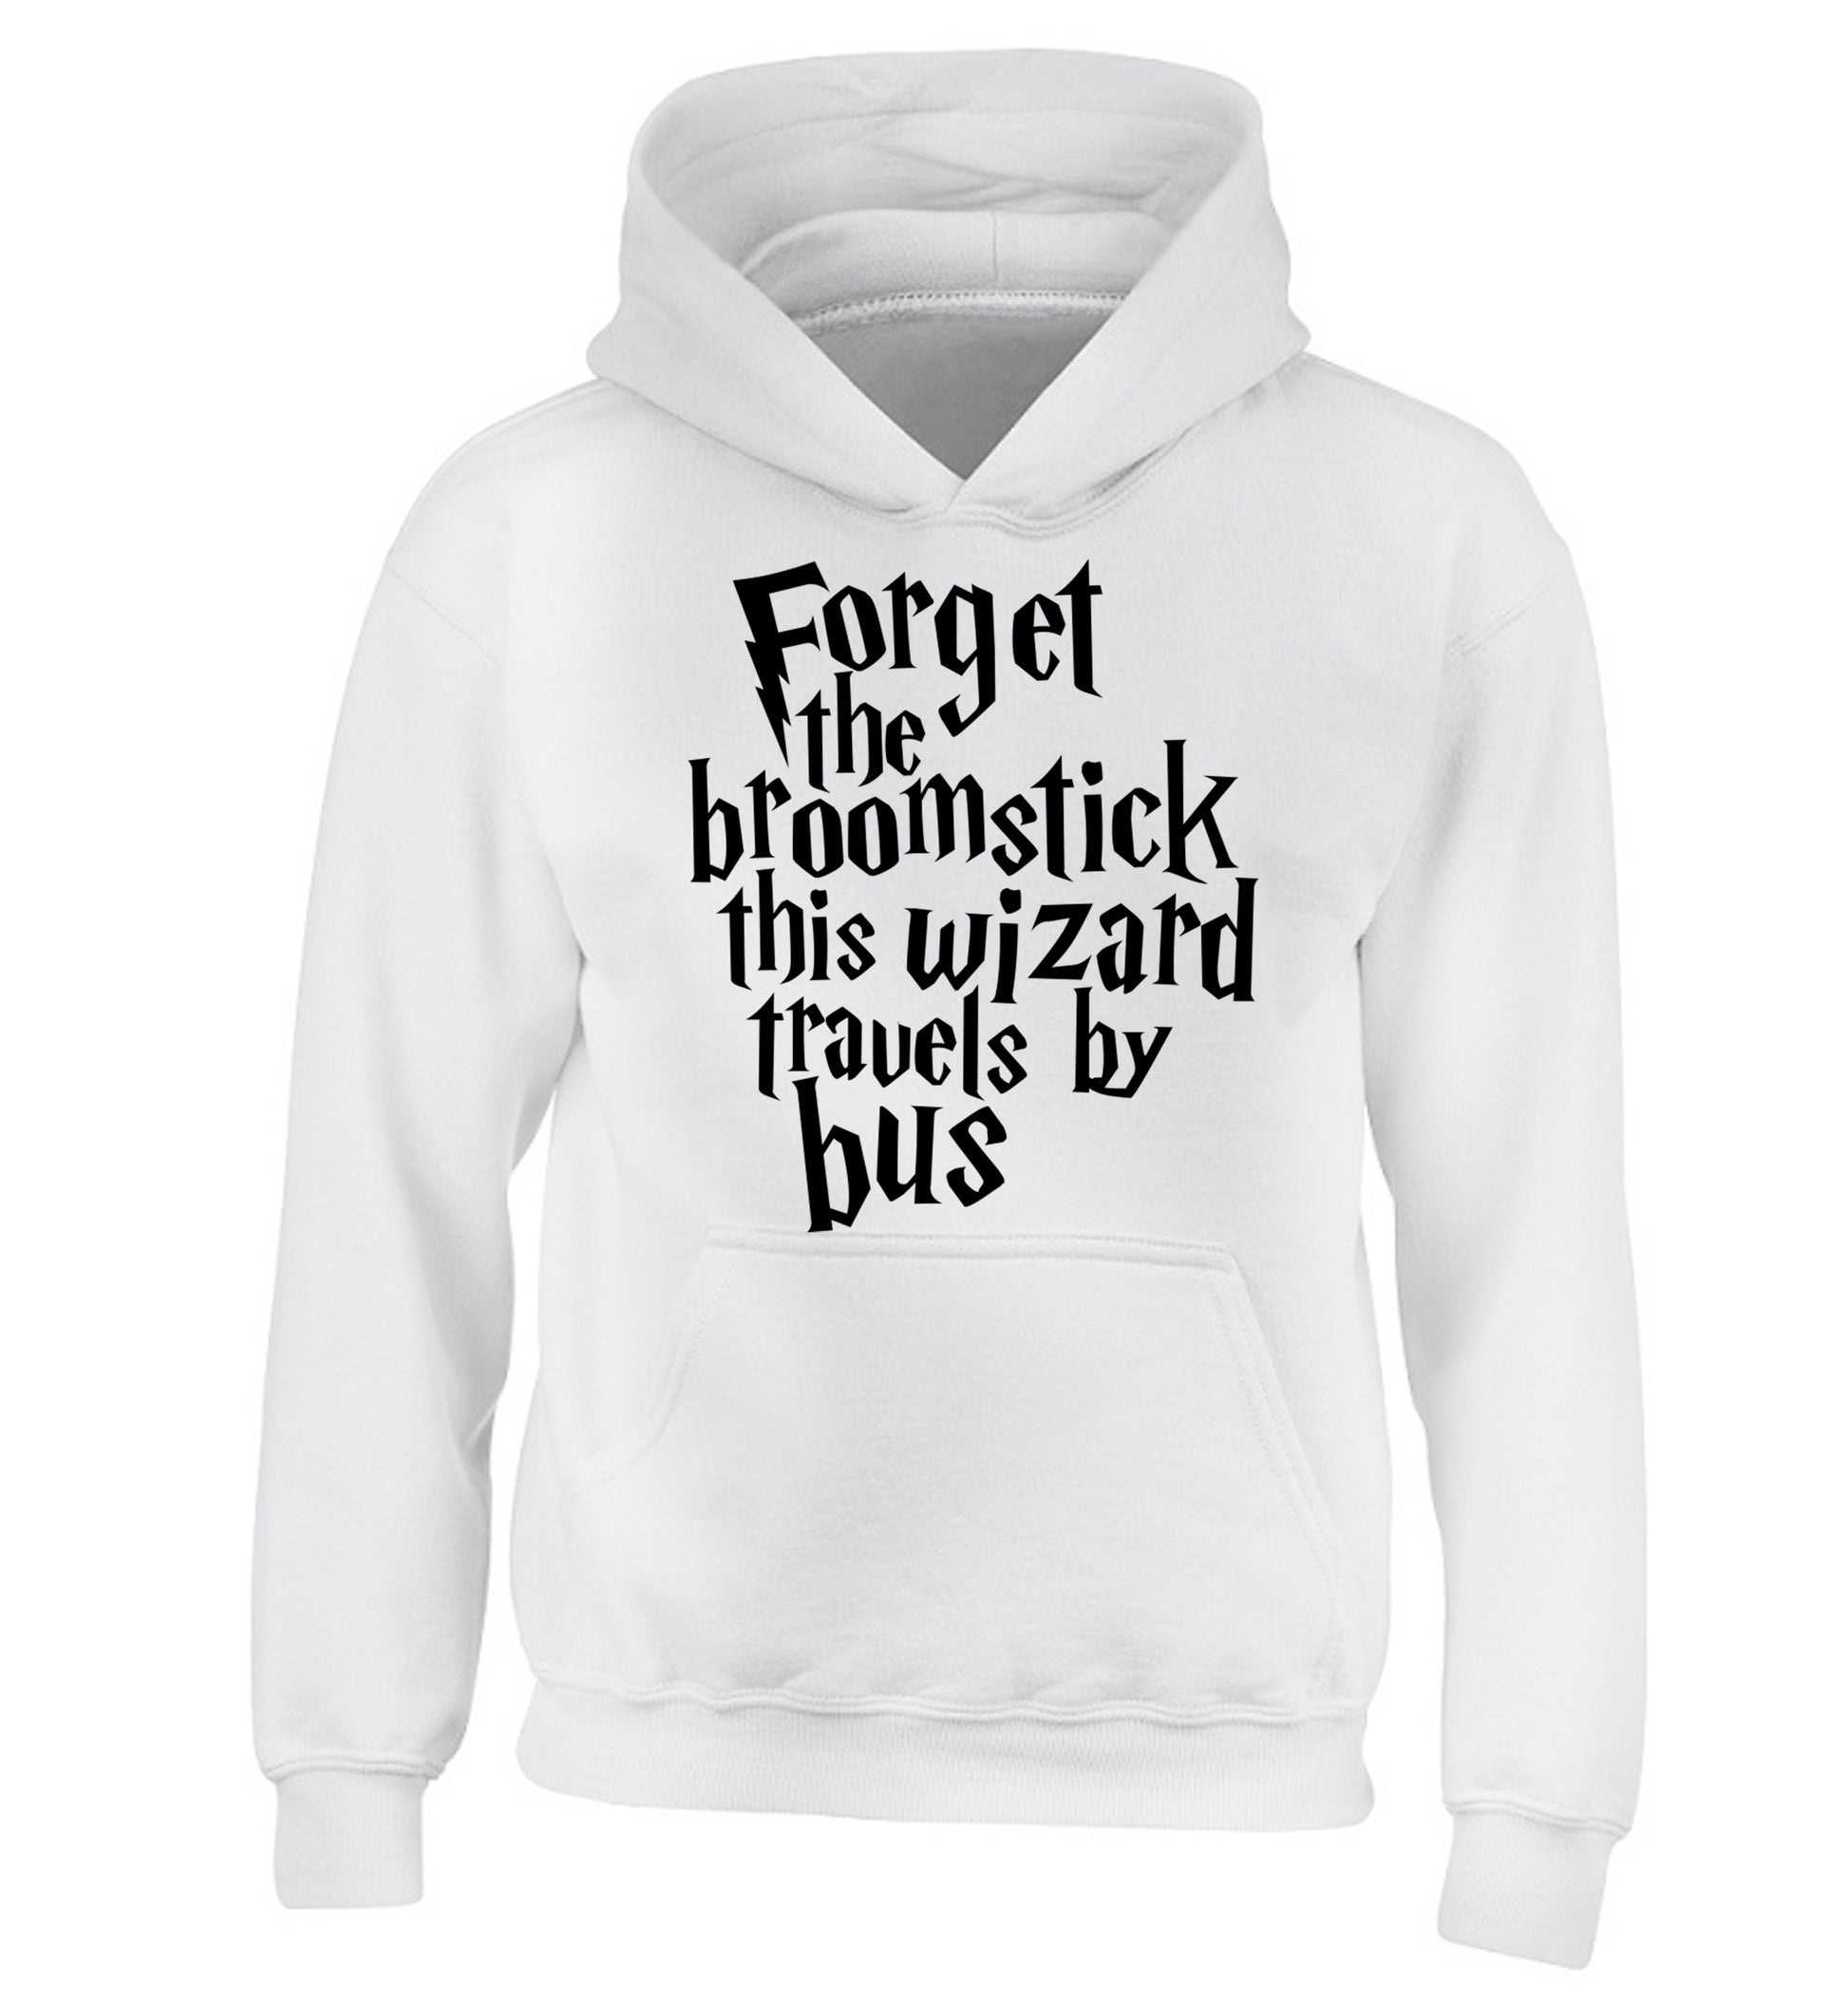 Forget the broomstick this wizard travels by bus children's white hoodie 12-14 Years